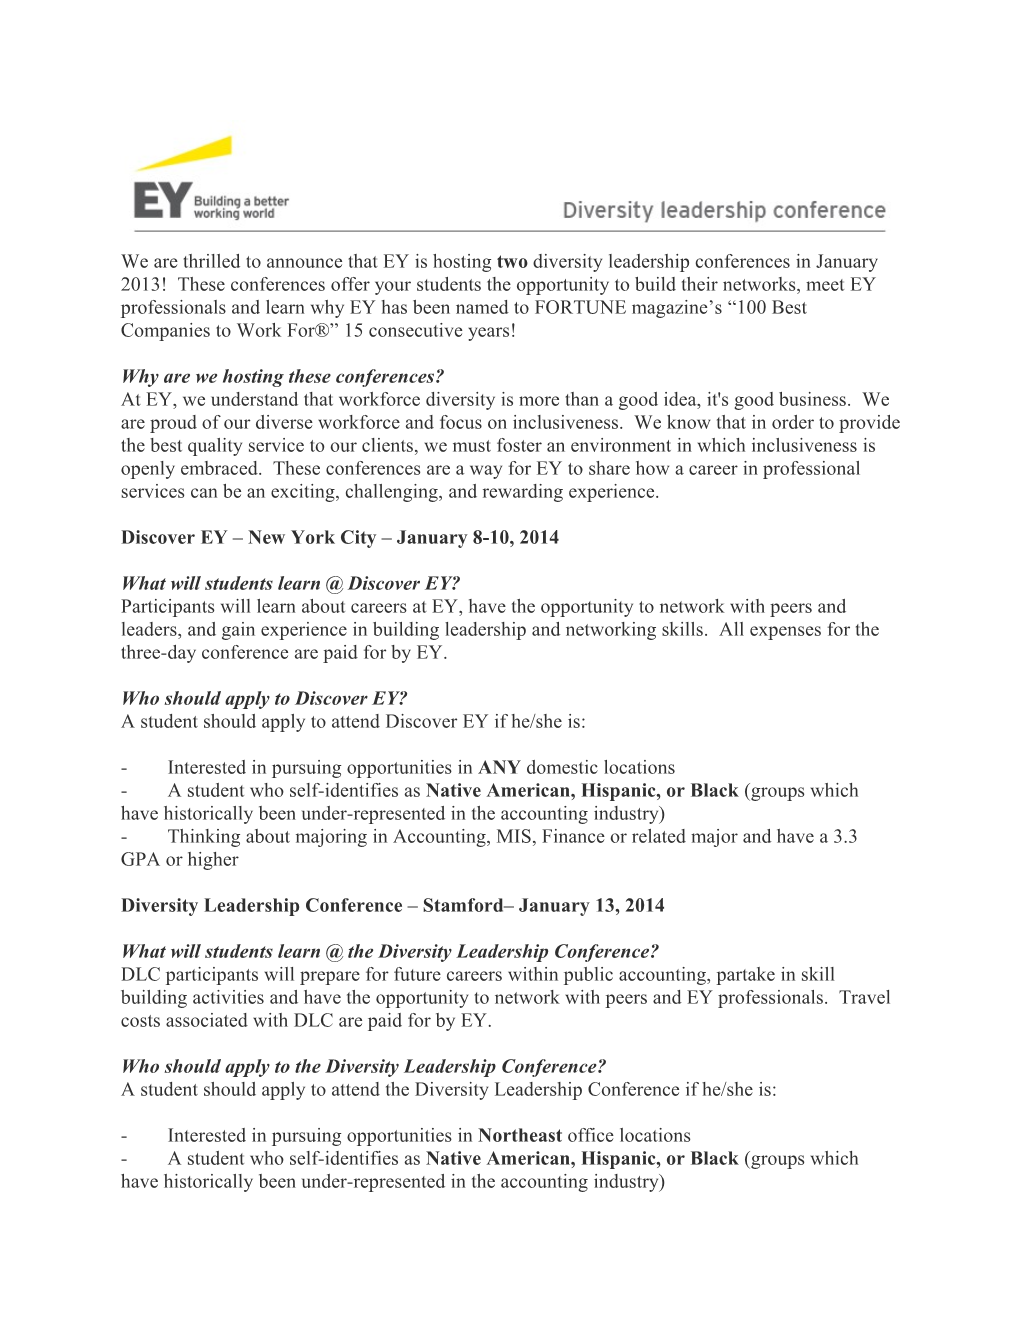 We Are Thrilled to Announce That EY Is Hosting Two Diversity Leadership Conferences In